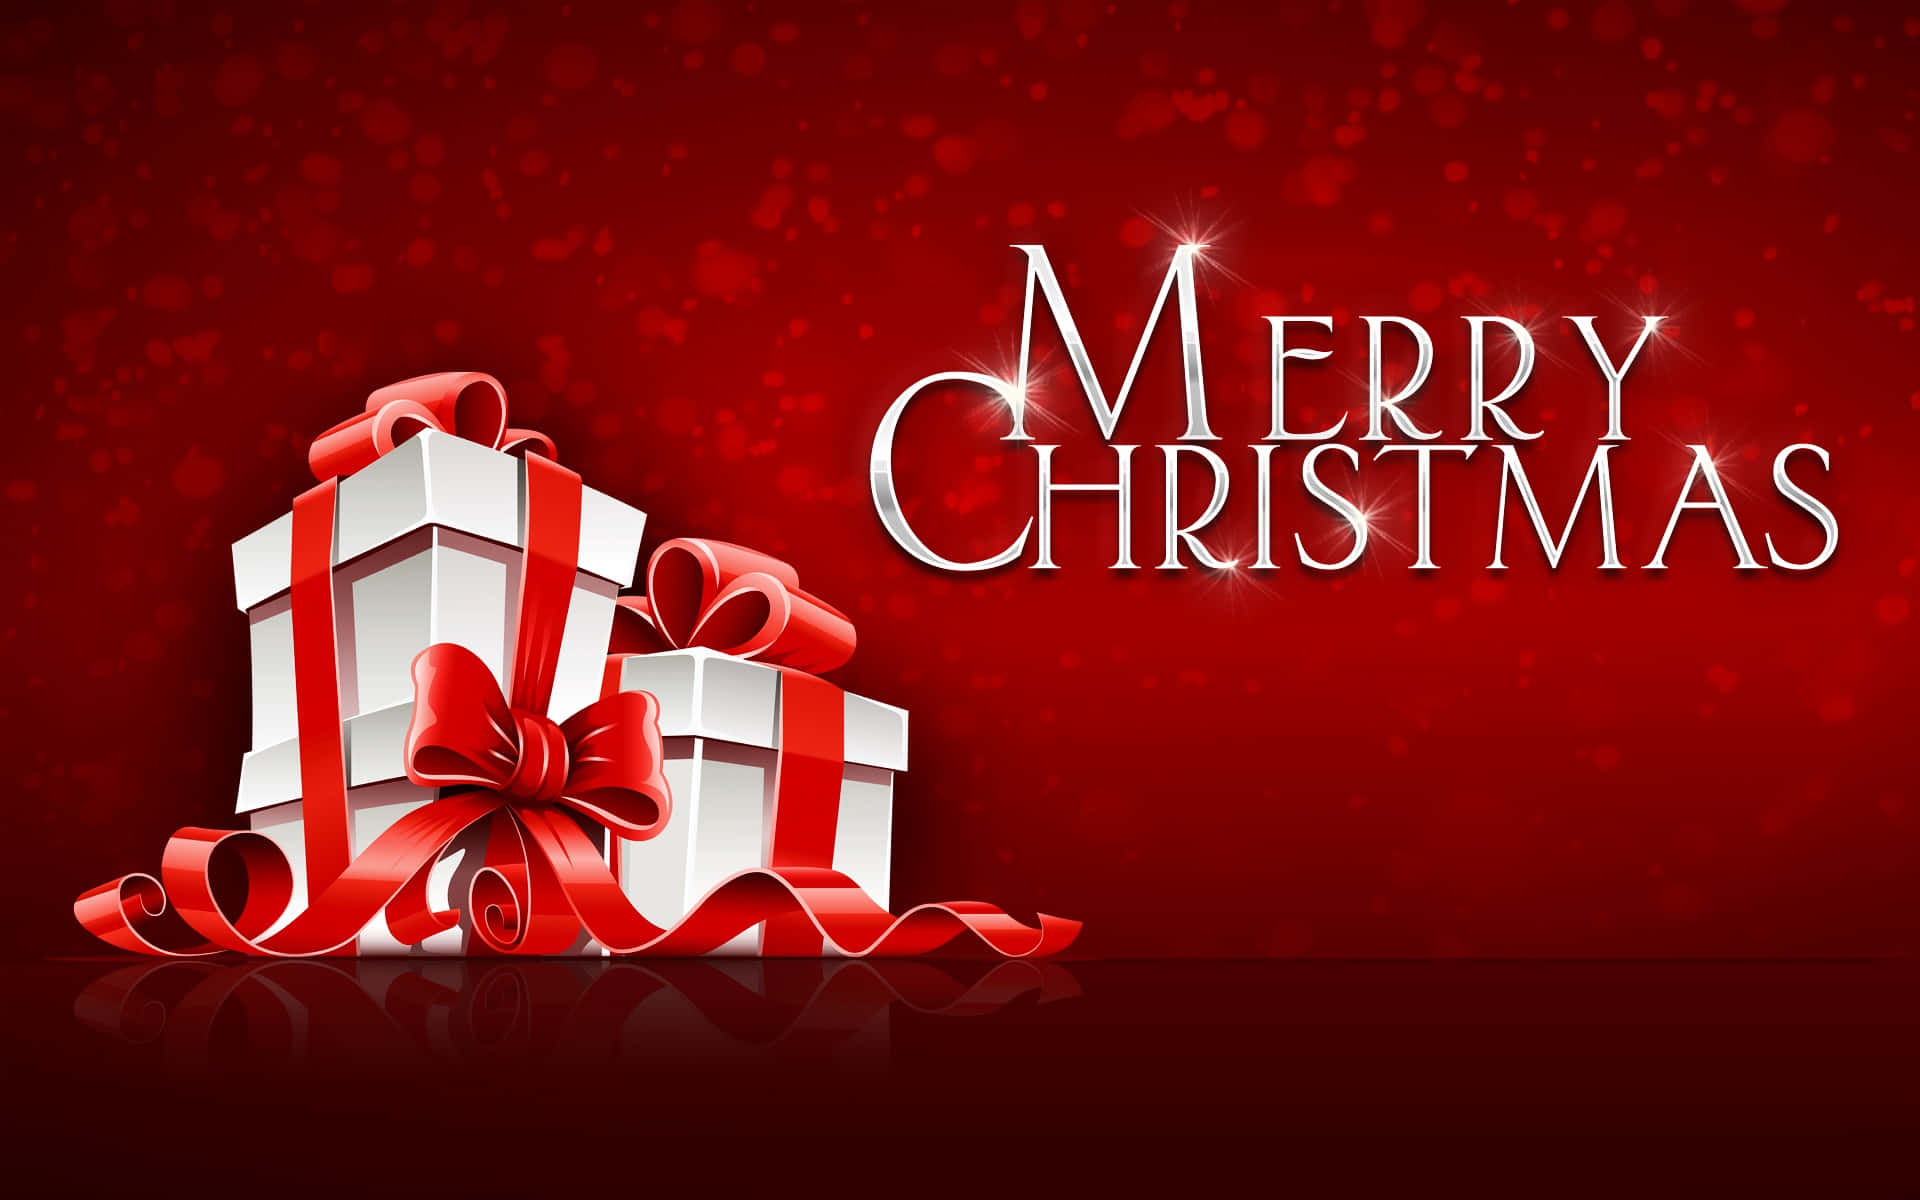 "Wishing you a Merry Christmas and a blessed and happy New Year!"